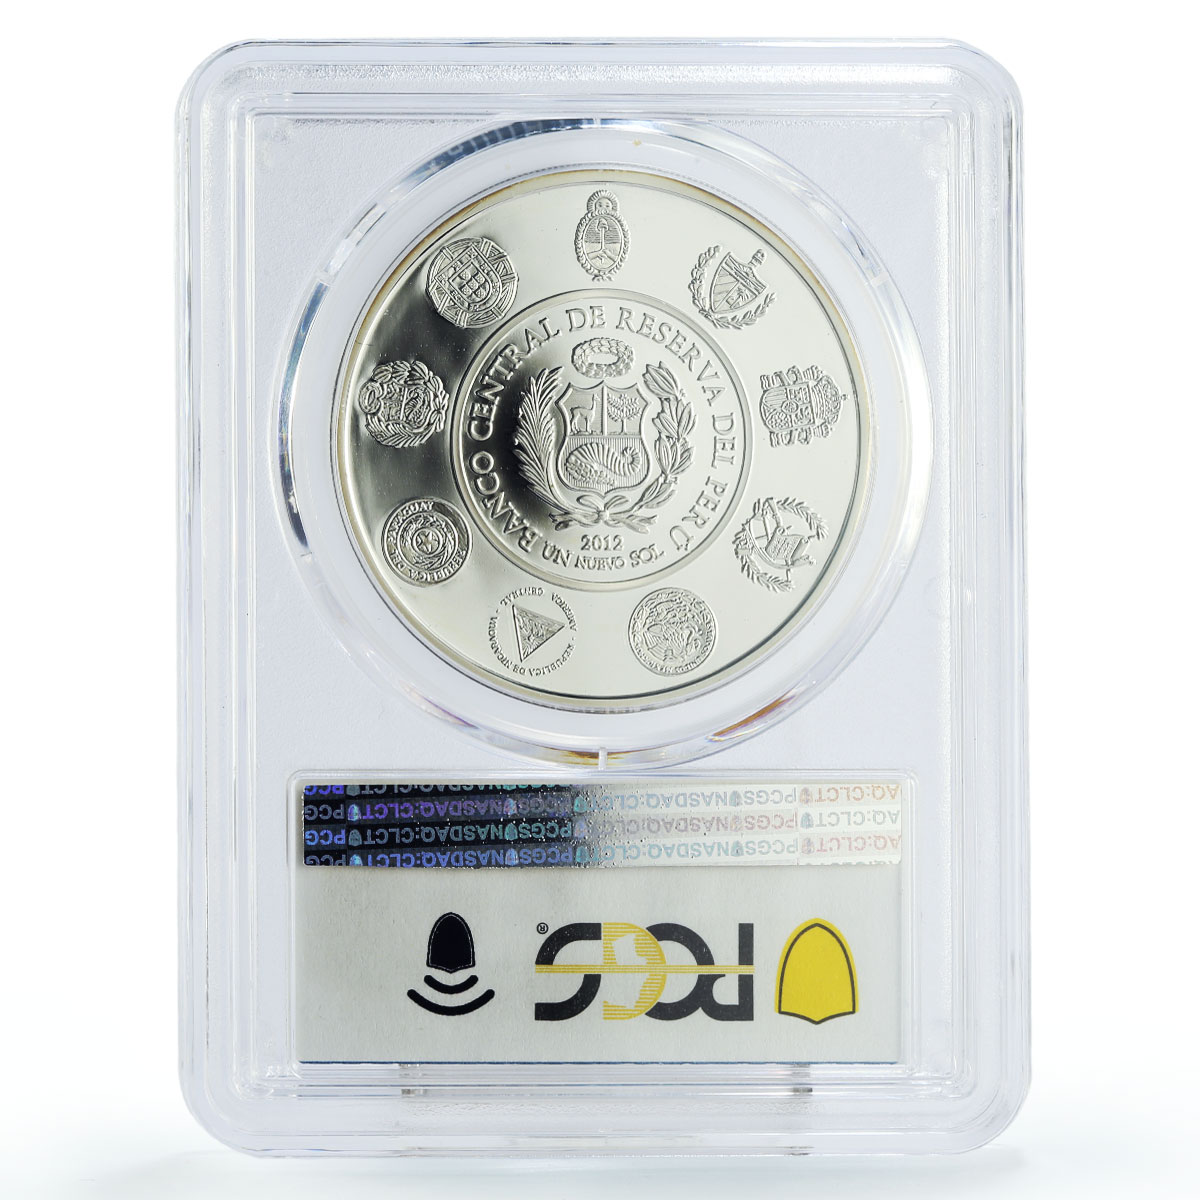 Peru 1 sol Encounter of Two Worlds Ritter Indians PR70 PCGS silver coin 2012